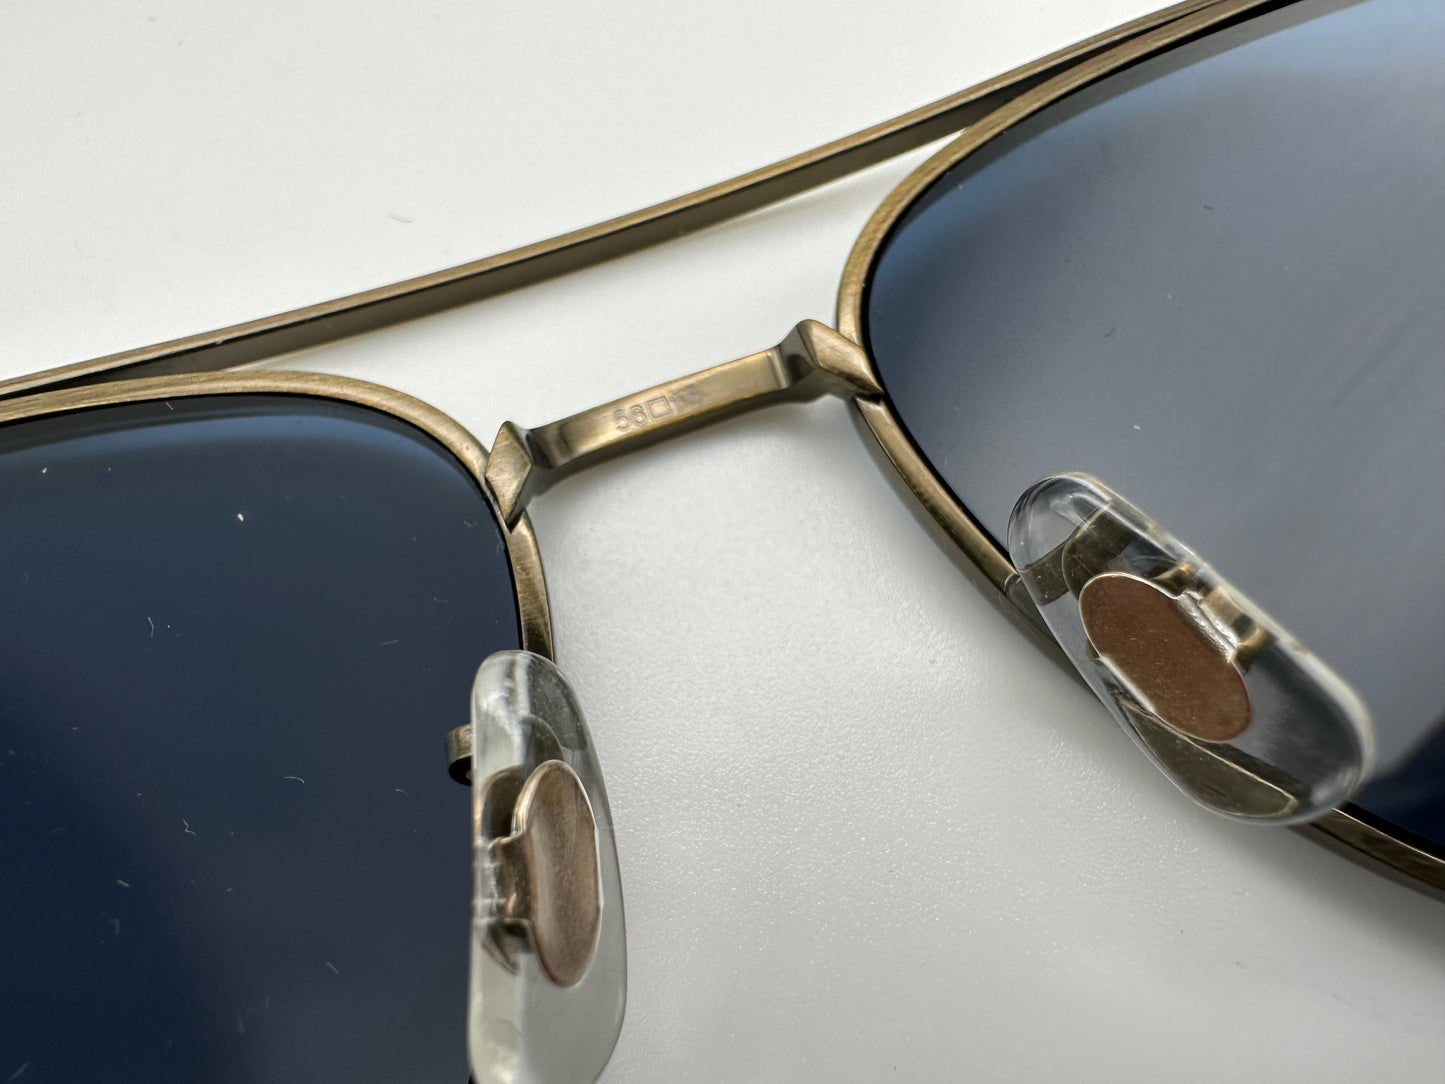 Oliver Peoples RIKSON Antique Gold/ Blue 56mm OV 1266ST CUSTOM Authentic